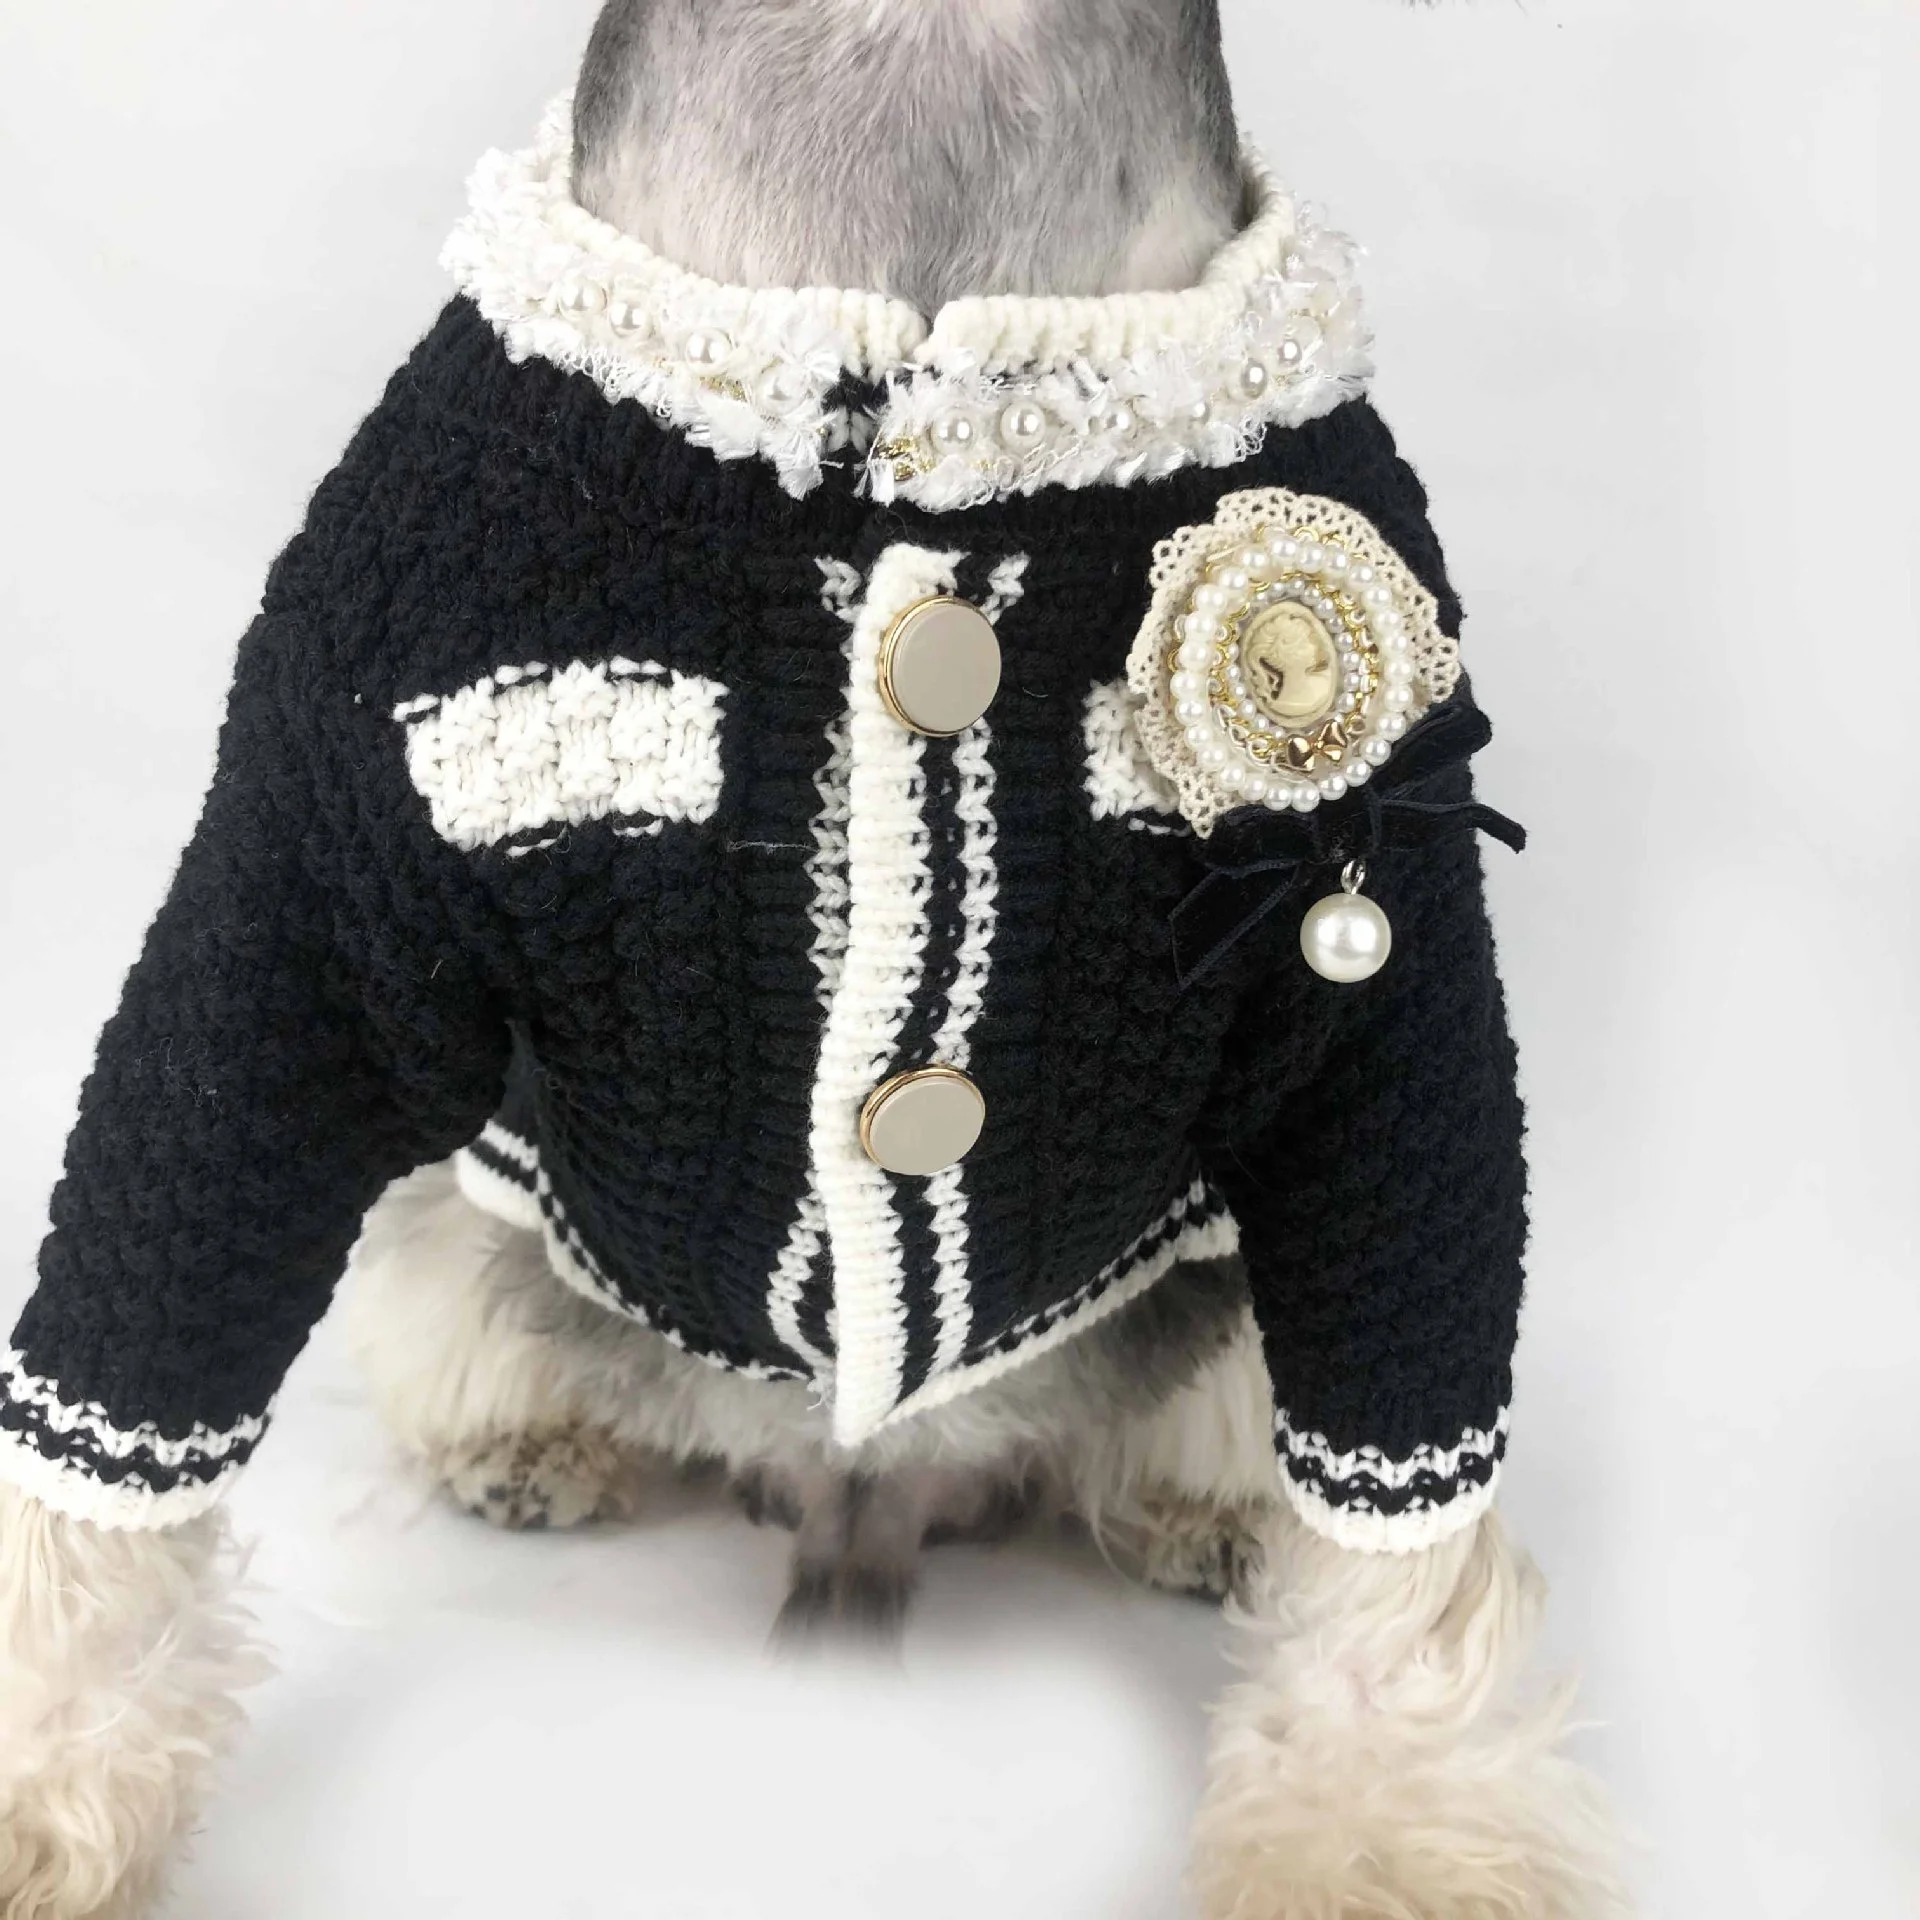 Chanel Bag Costume for Dogs